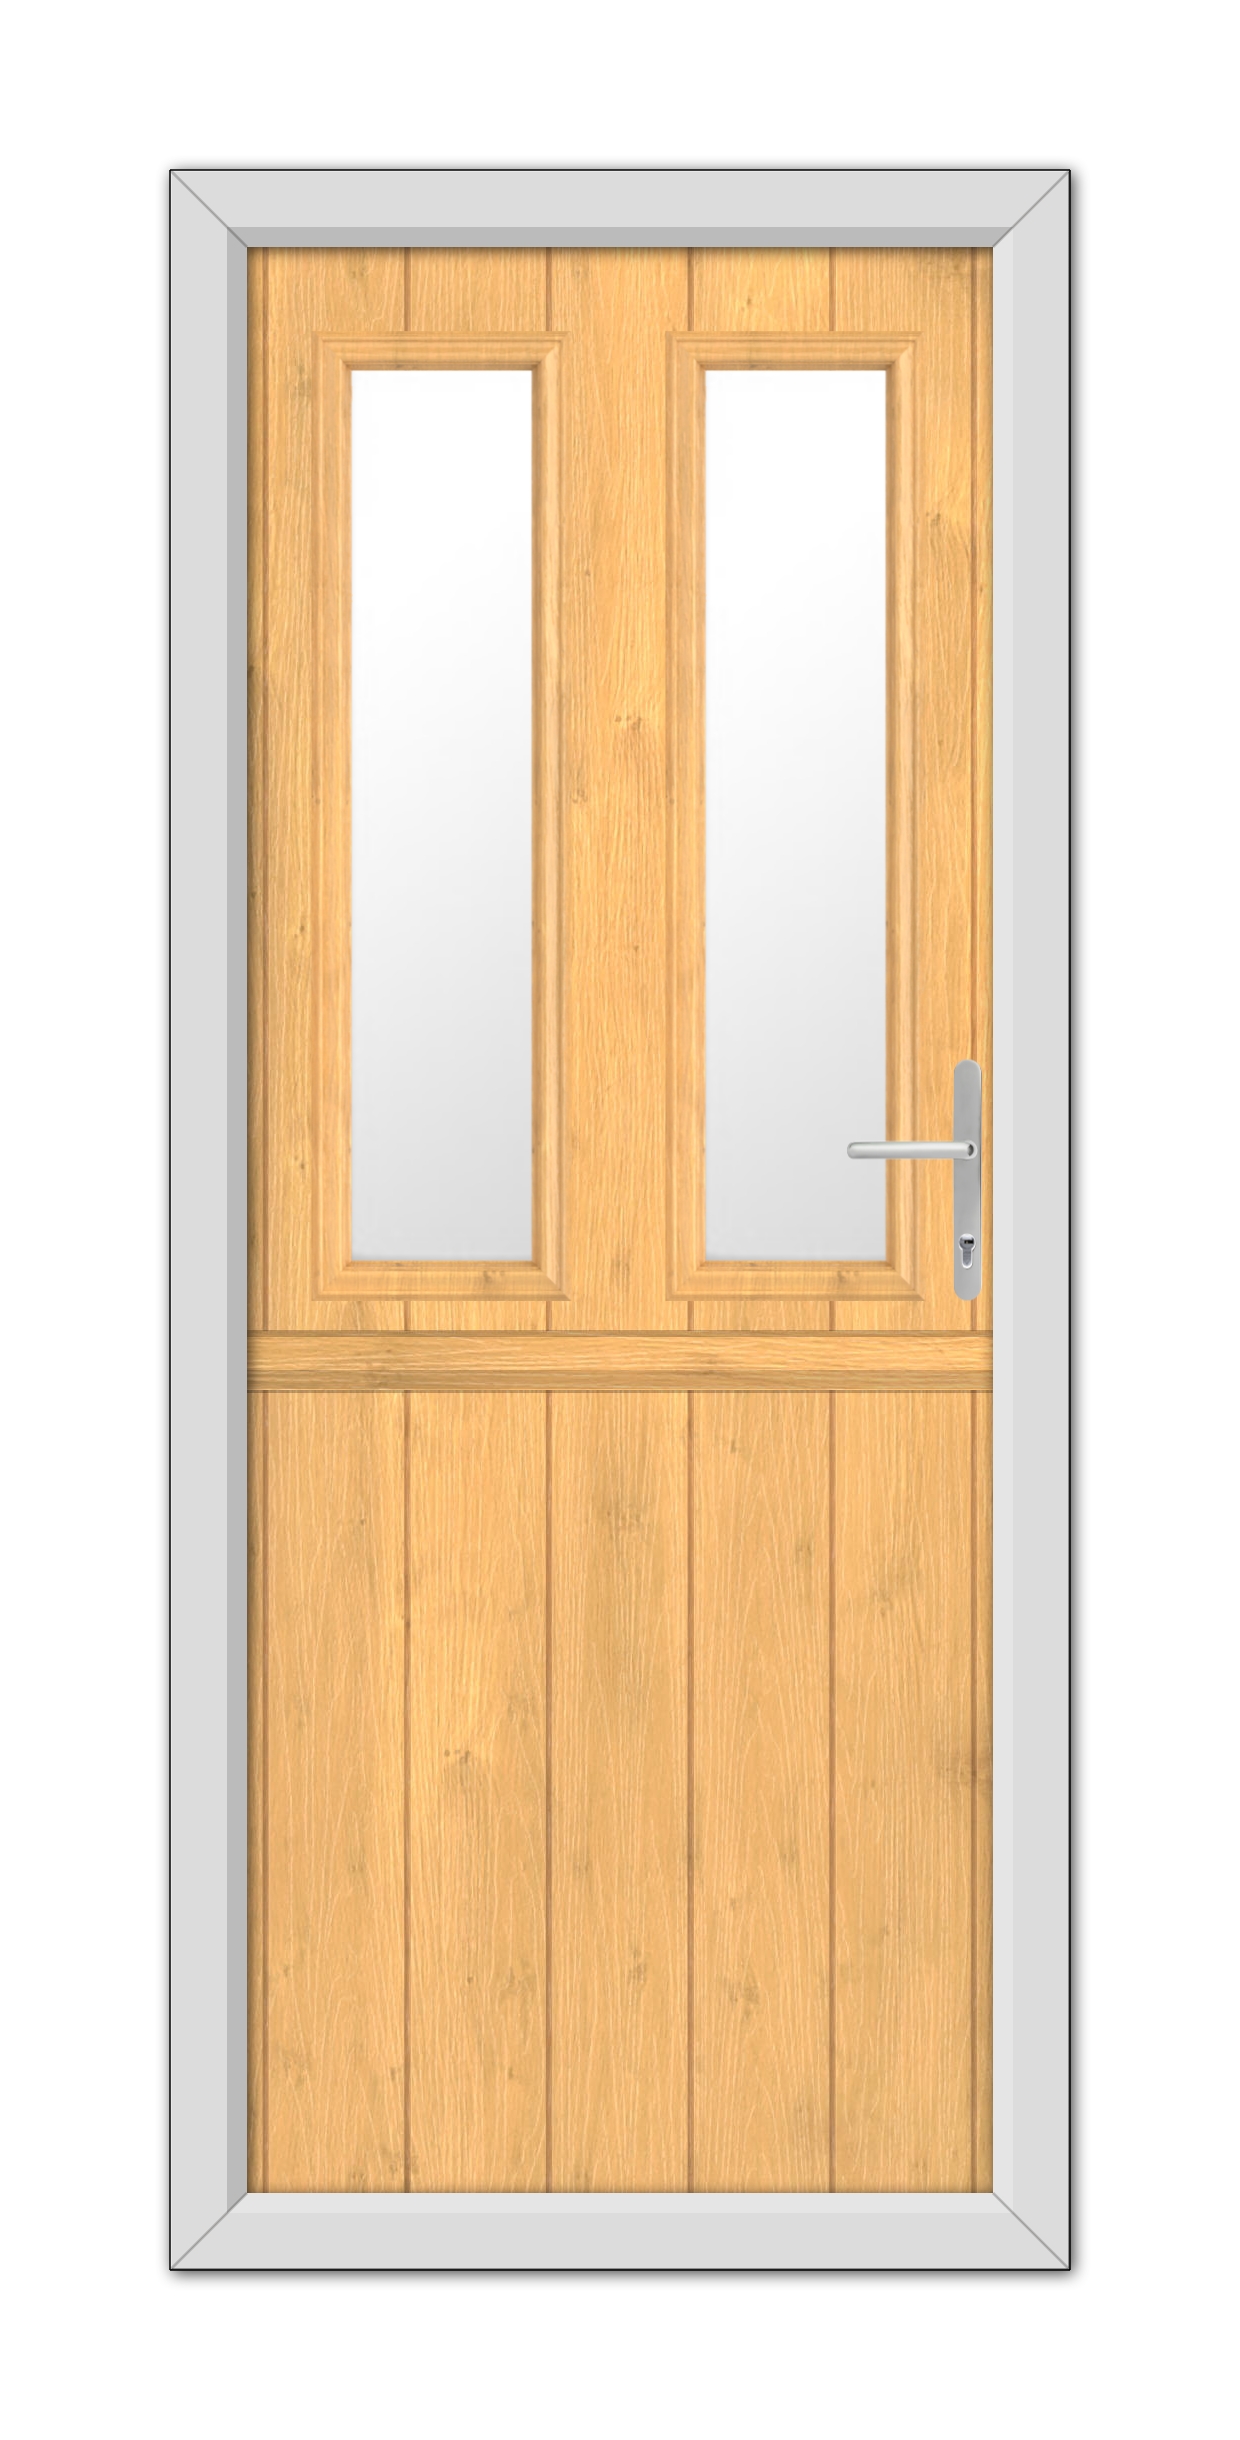 A modern, double Irish Oak Wellington Stable Composite Door 48mm Timber Core with glass panels, framed in gray, equipped with a metallic handle on the right side.